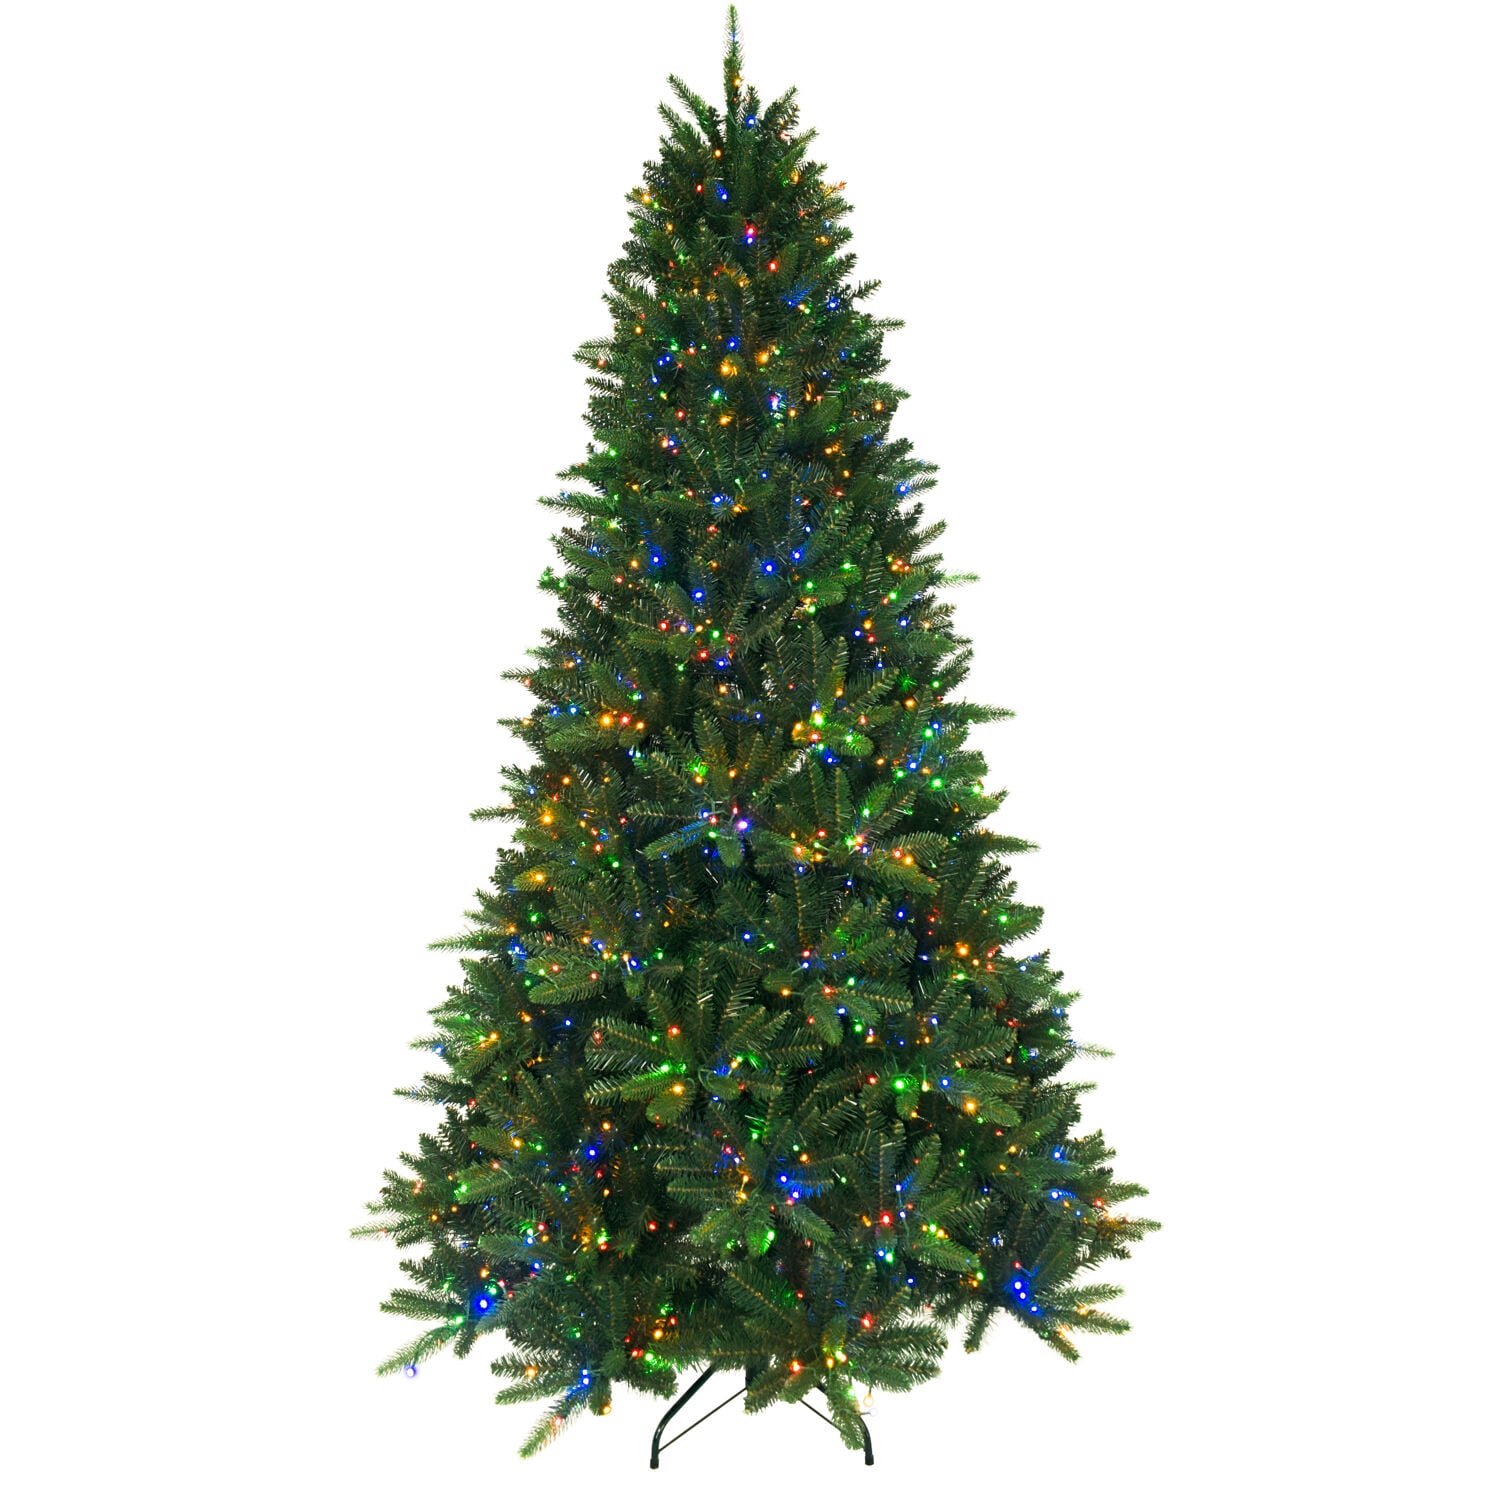 A Christmas Tree That Changes Size at Bronner's!